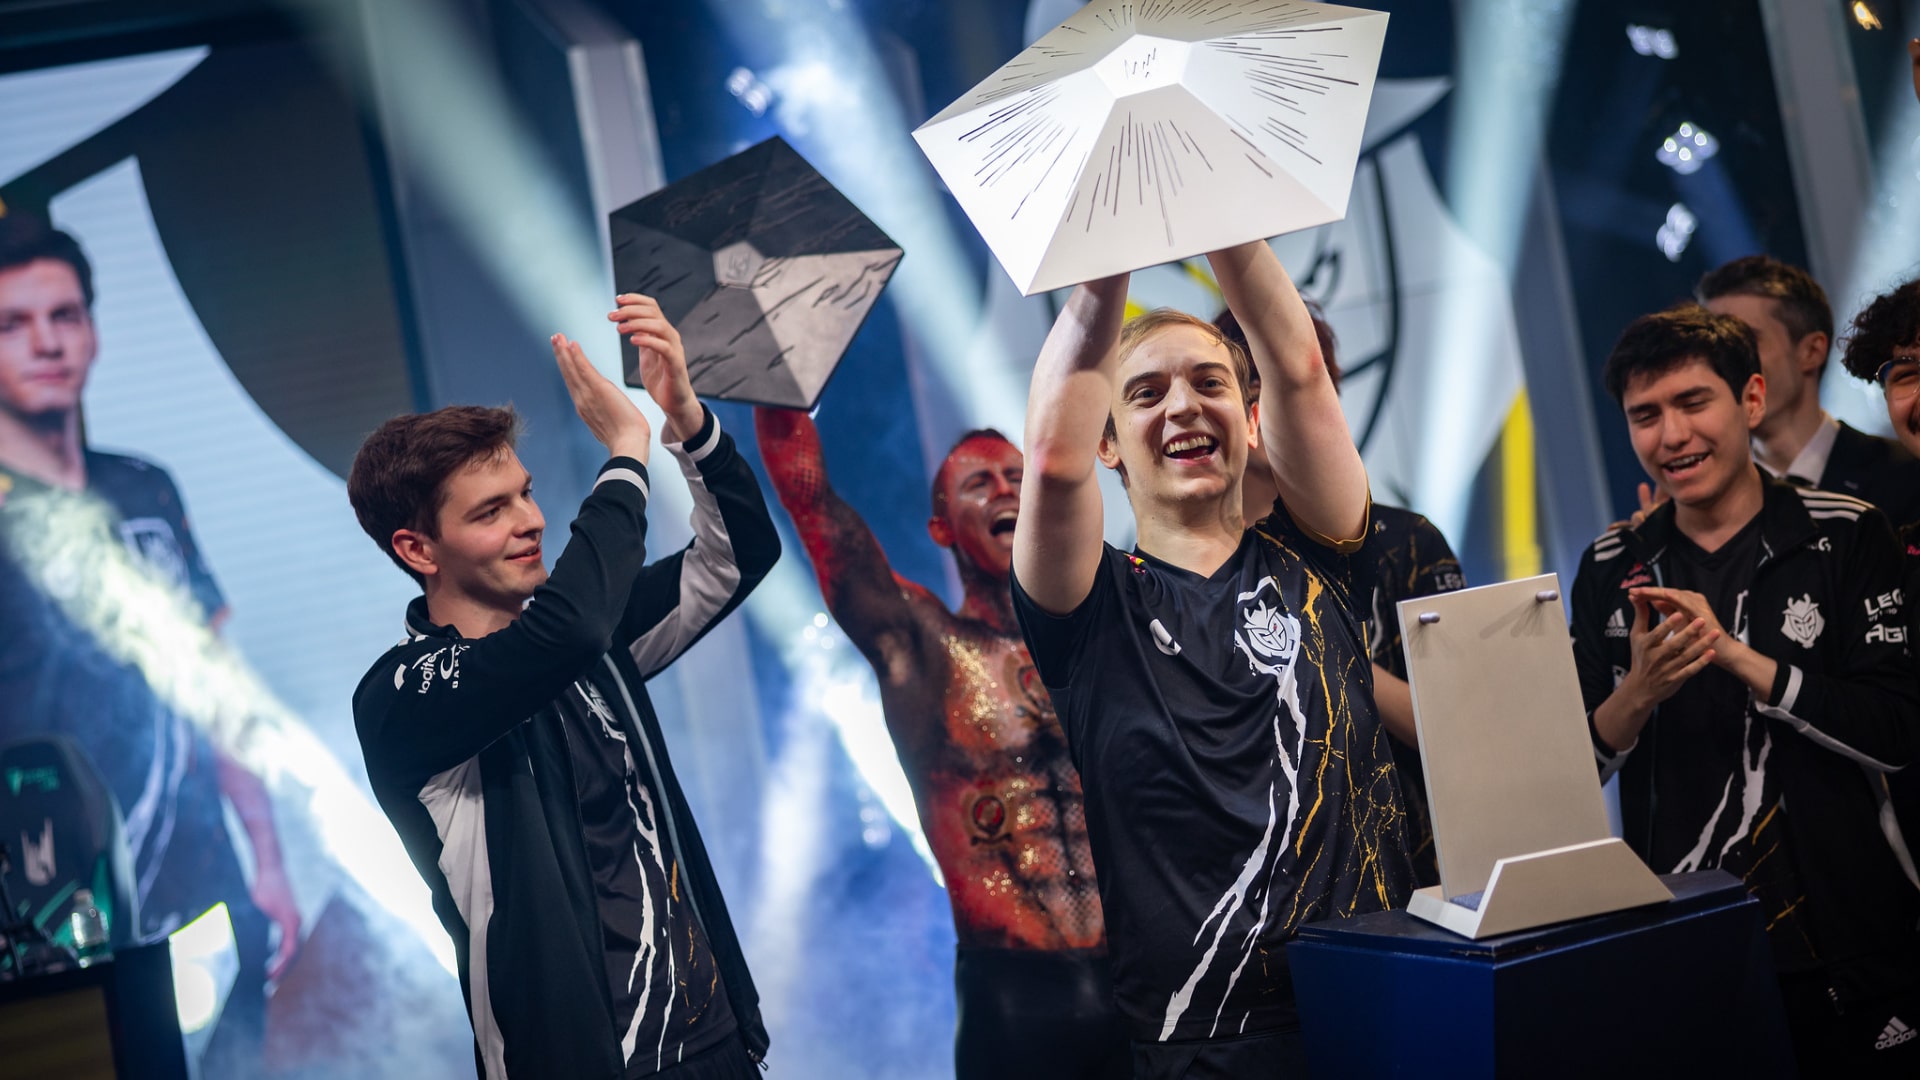 G2 Esports Caps is the most decorated player in LEC history | ONE Esports